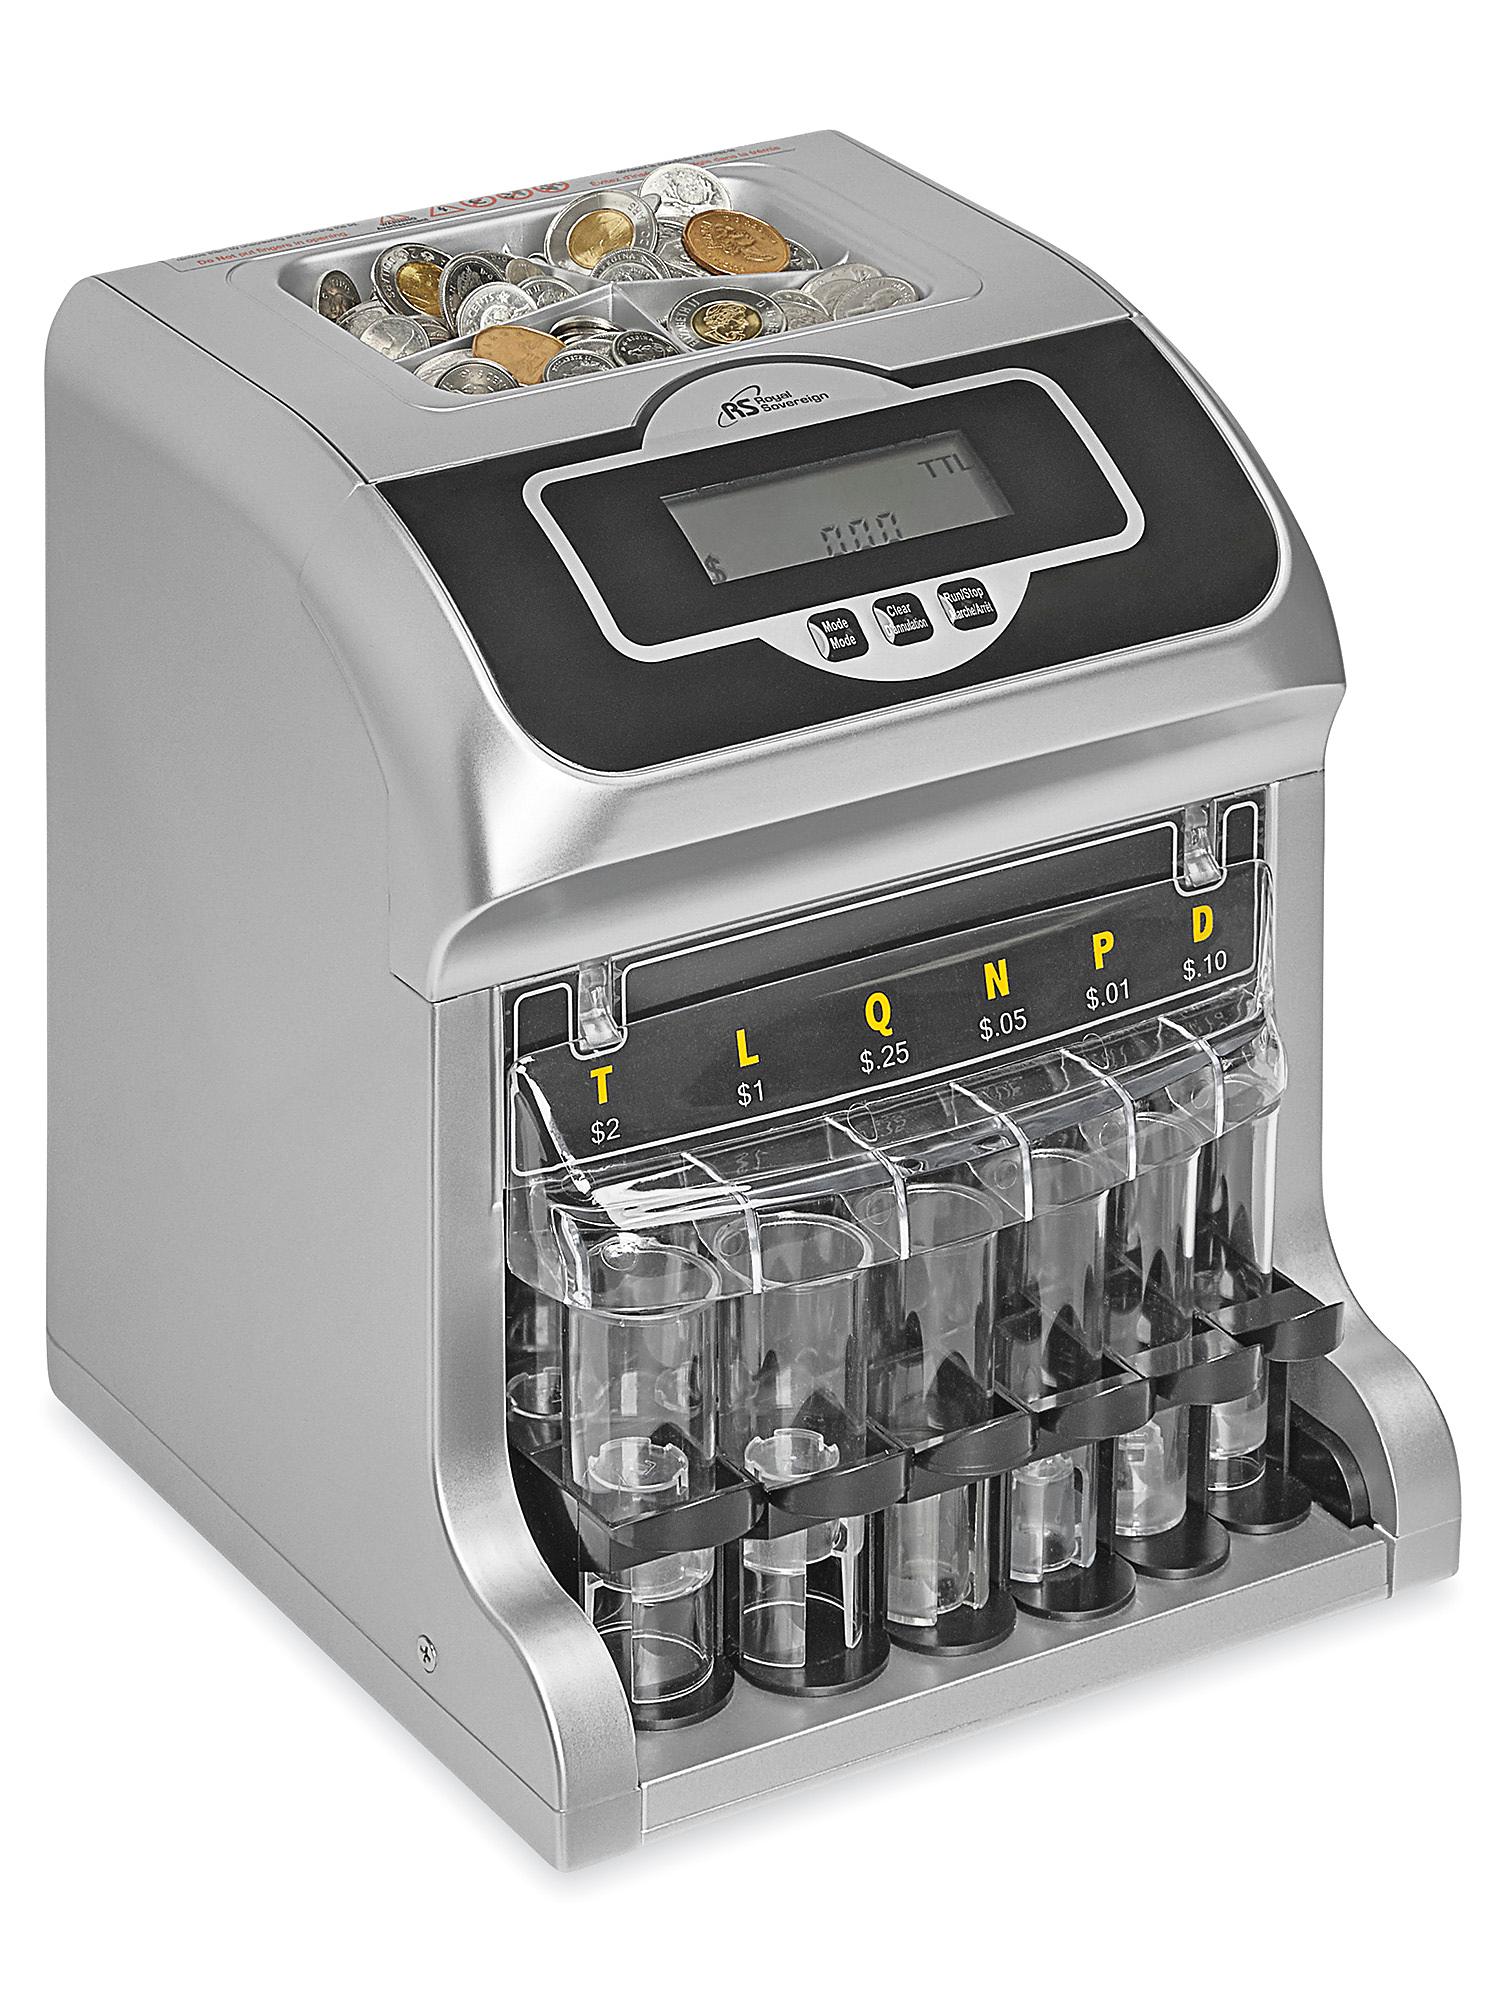 Coin Counters, Coin Counting Machines, Coin Sorters in Stock - ULINE